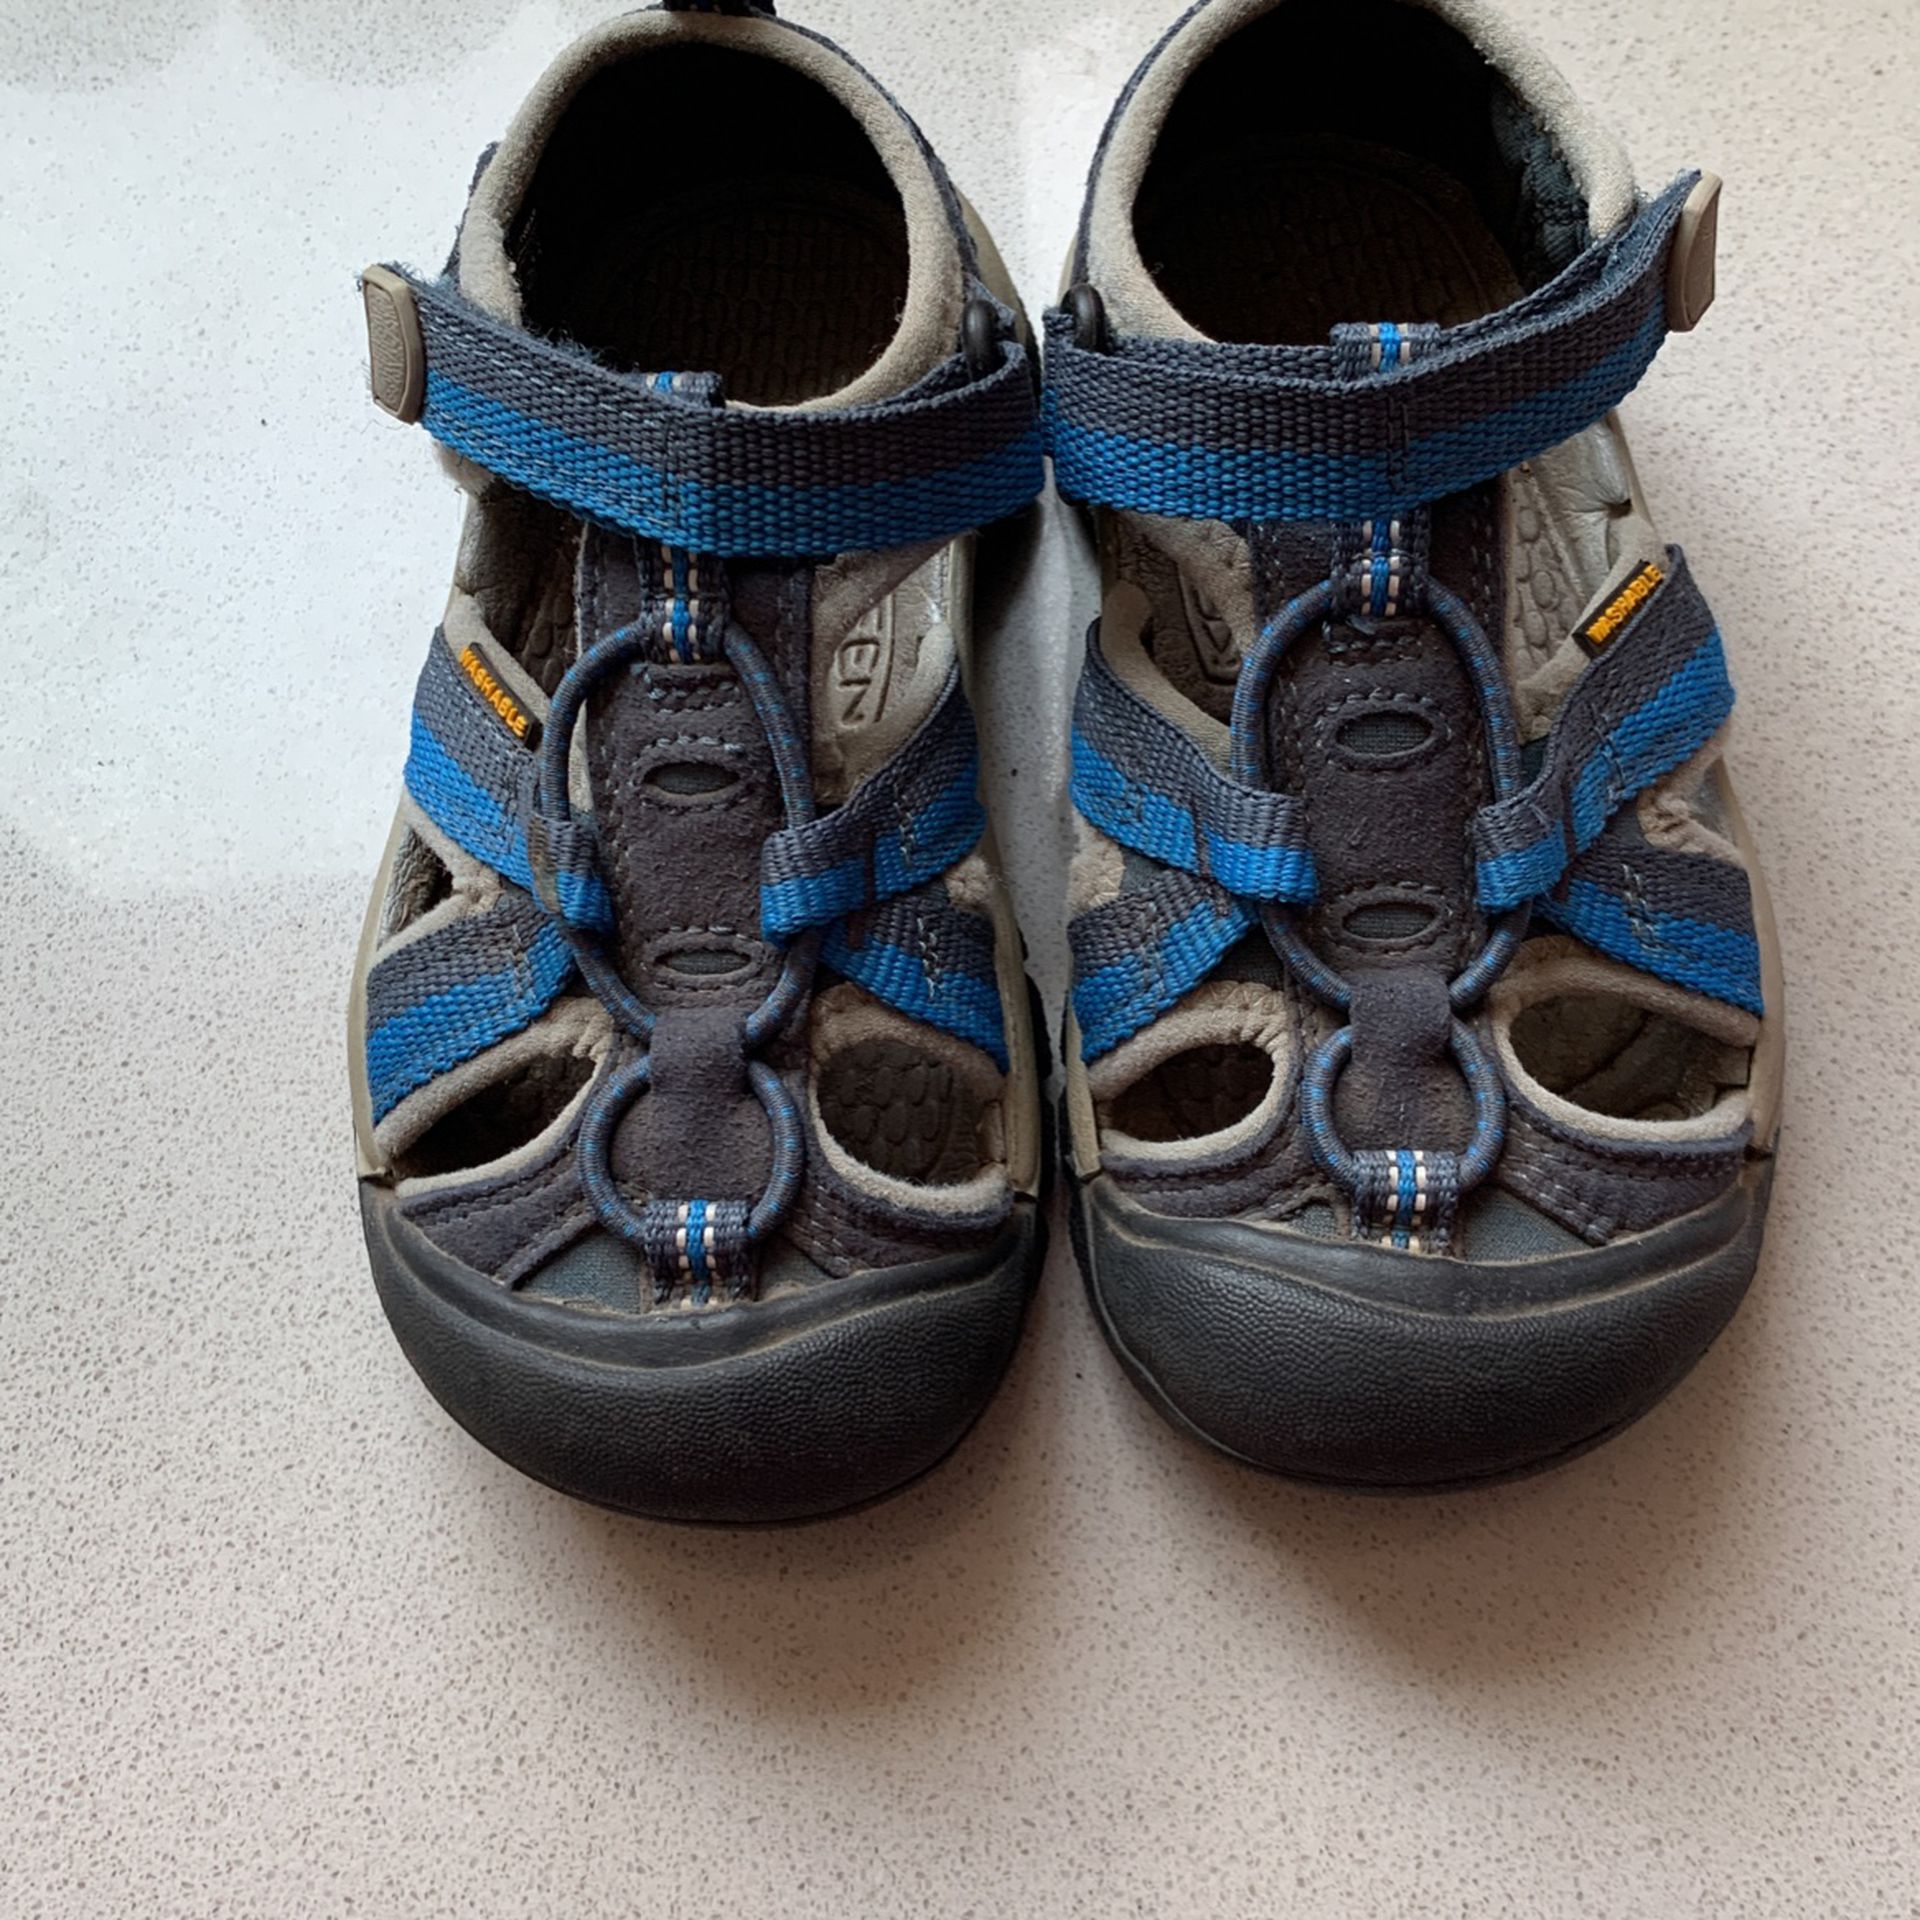 Boys sandals(brand Keen) washable , size 10(toddlers 